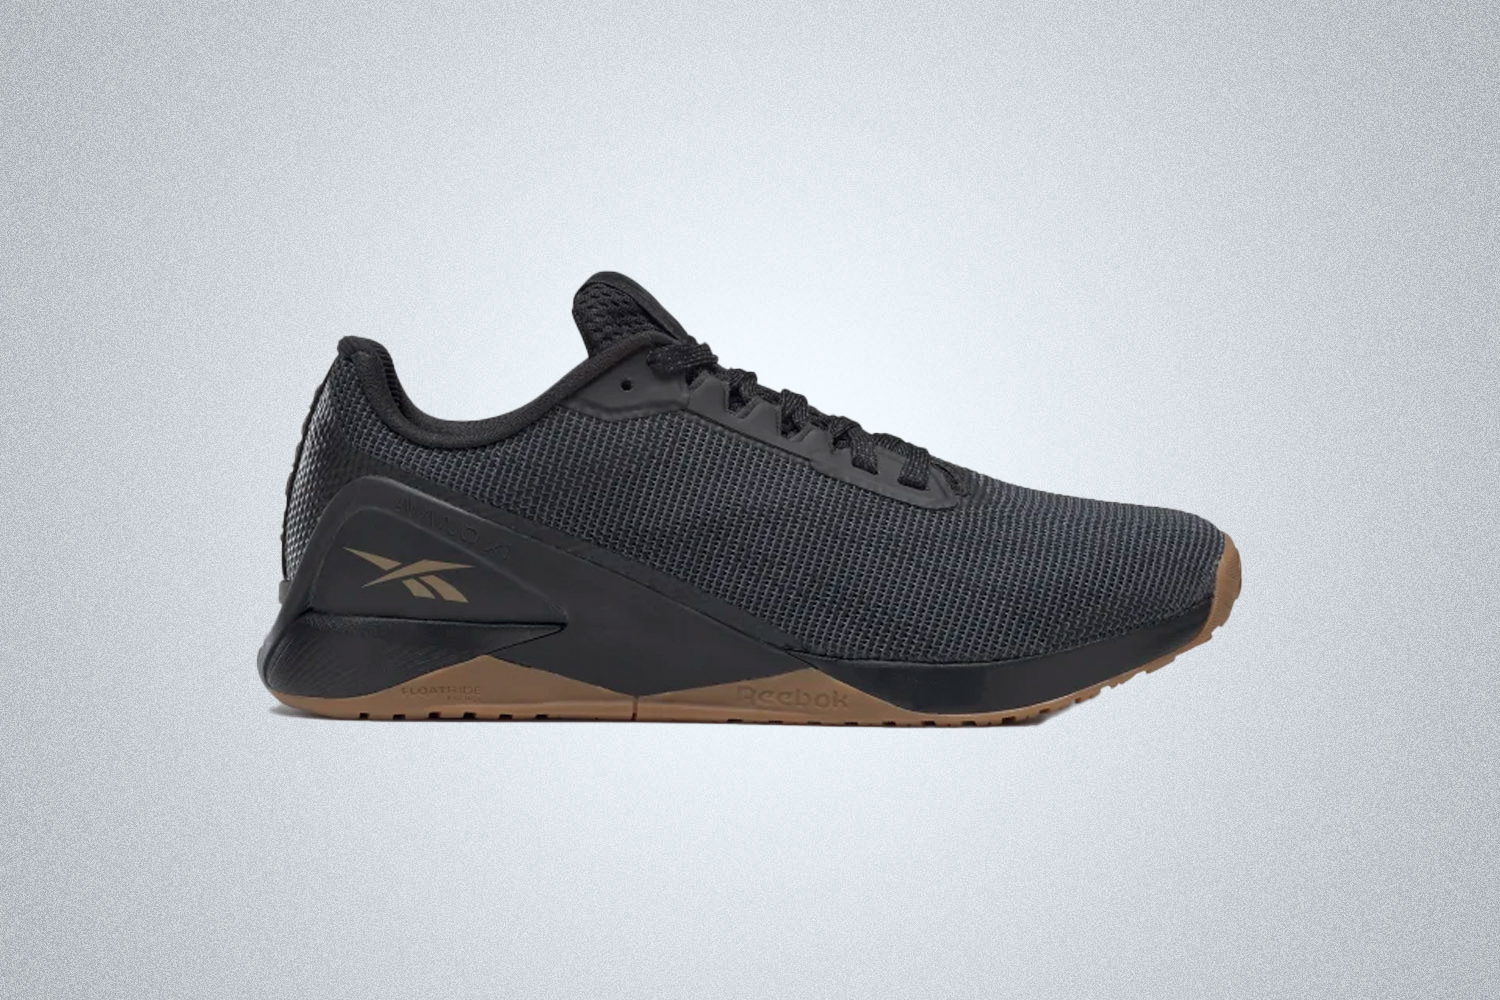 The Nano X1 Grit Training Shoes in black for exercise, crossfit and more